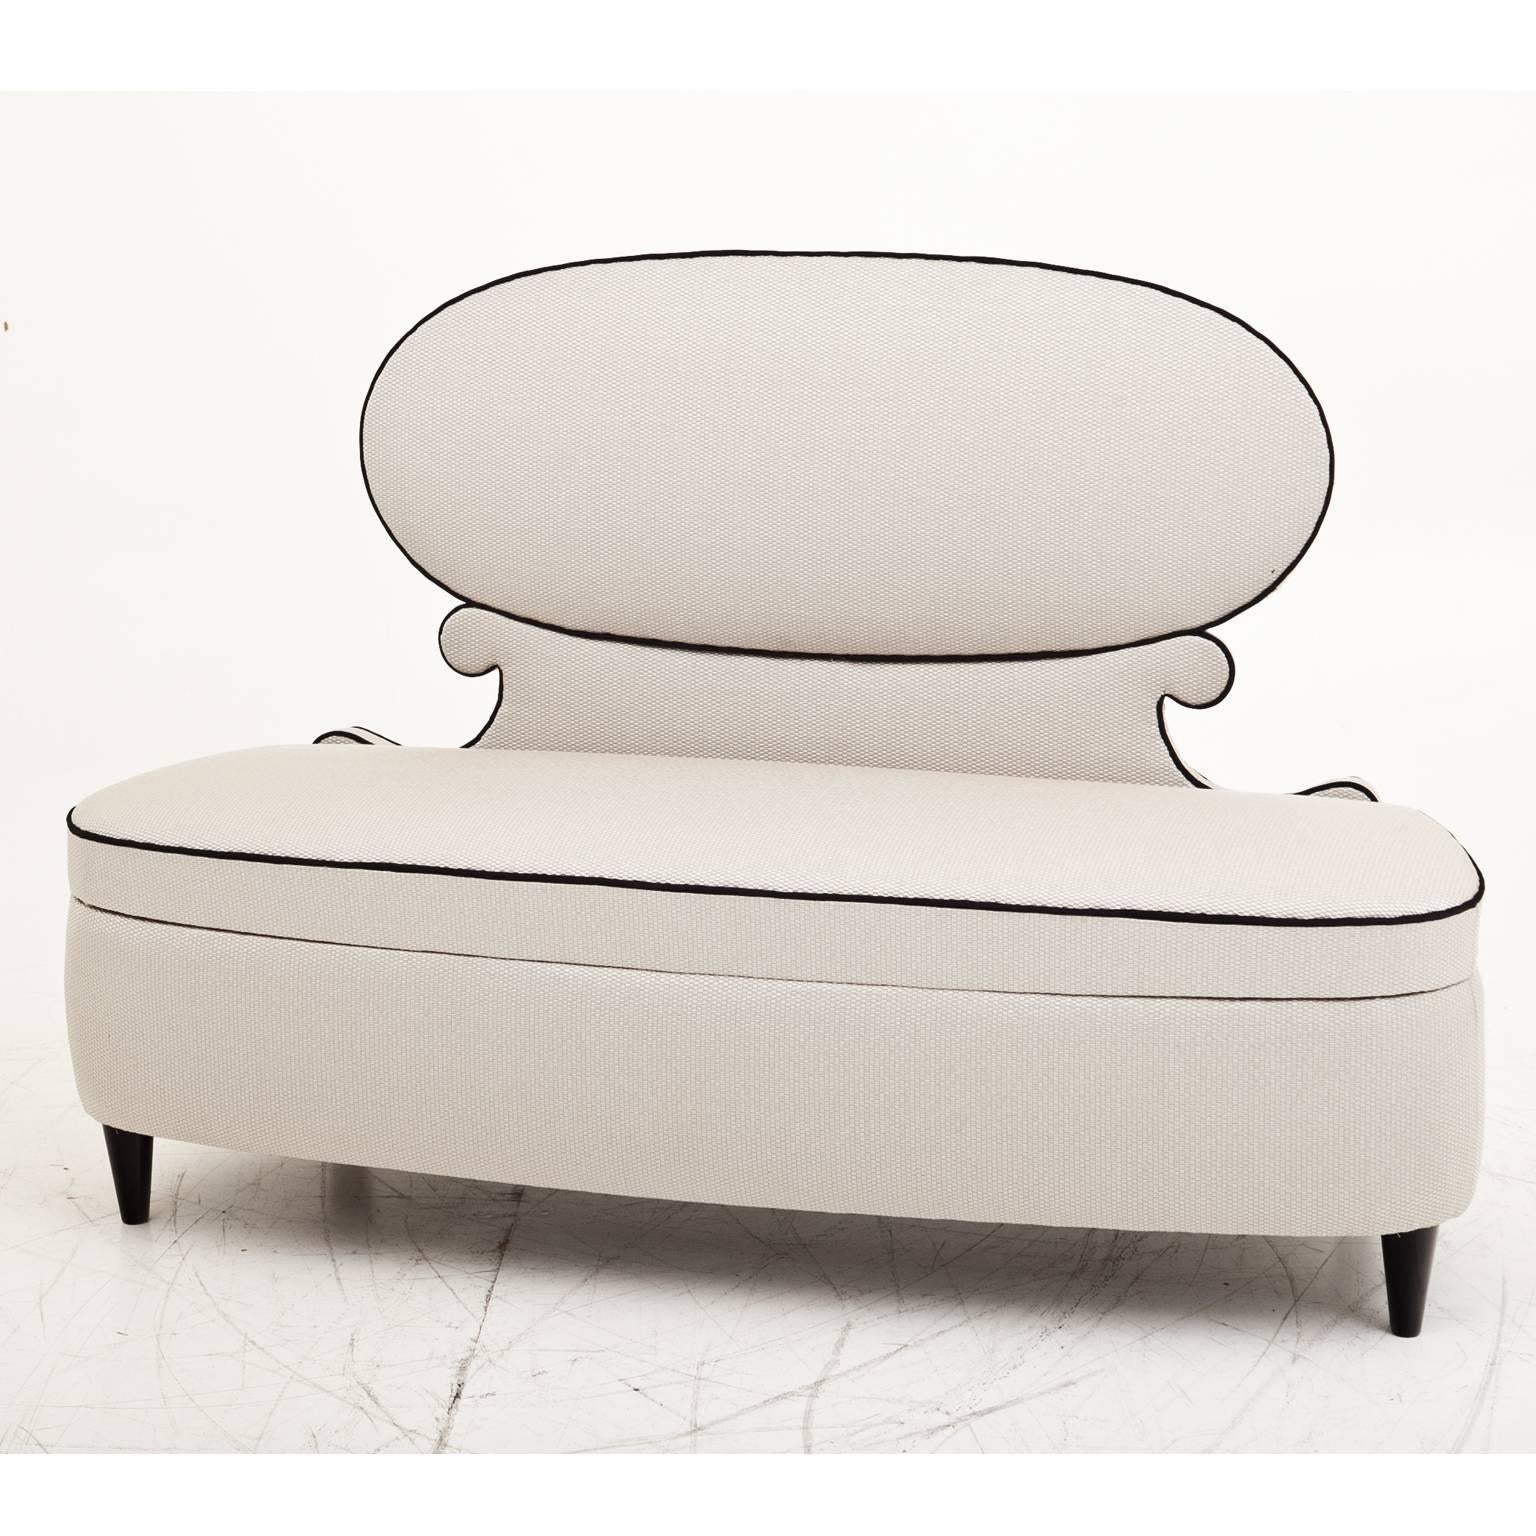 Elegant canapé sofa with a medaillon-shaped backrest and a rounded seat on black cone-shaped feet. The sofa is reupholstered with a beautiful, high quality fabric.